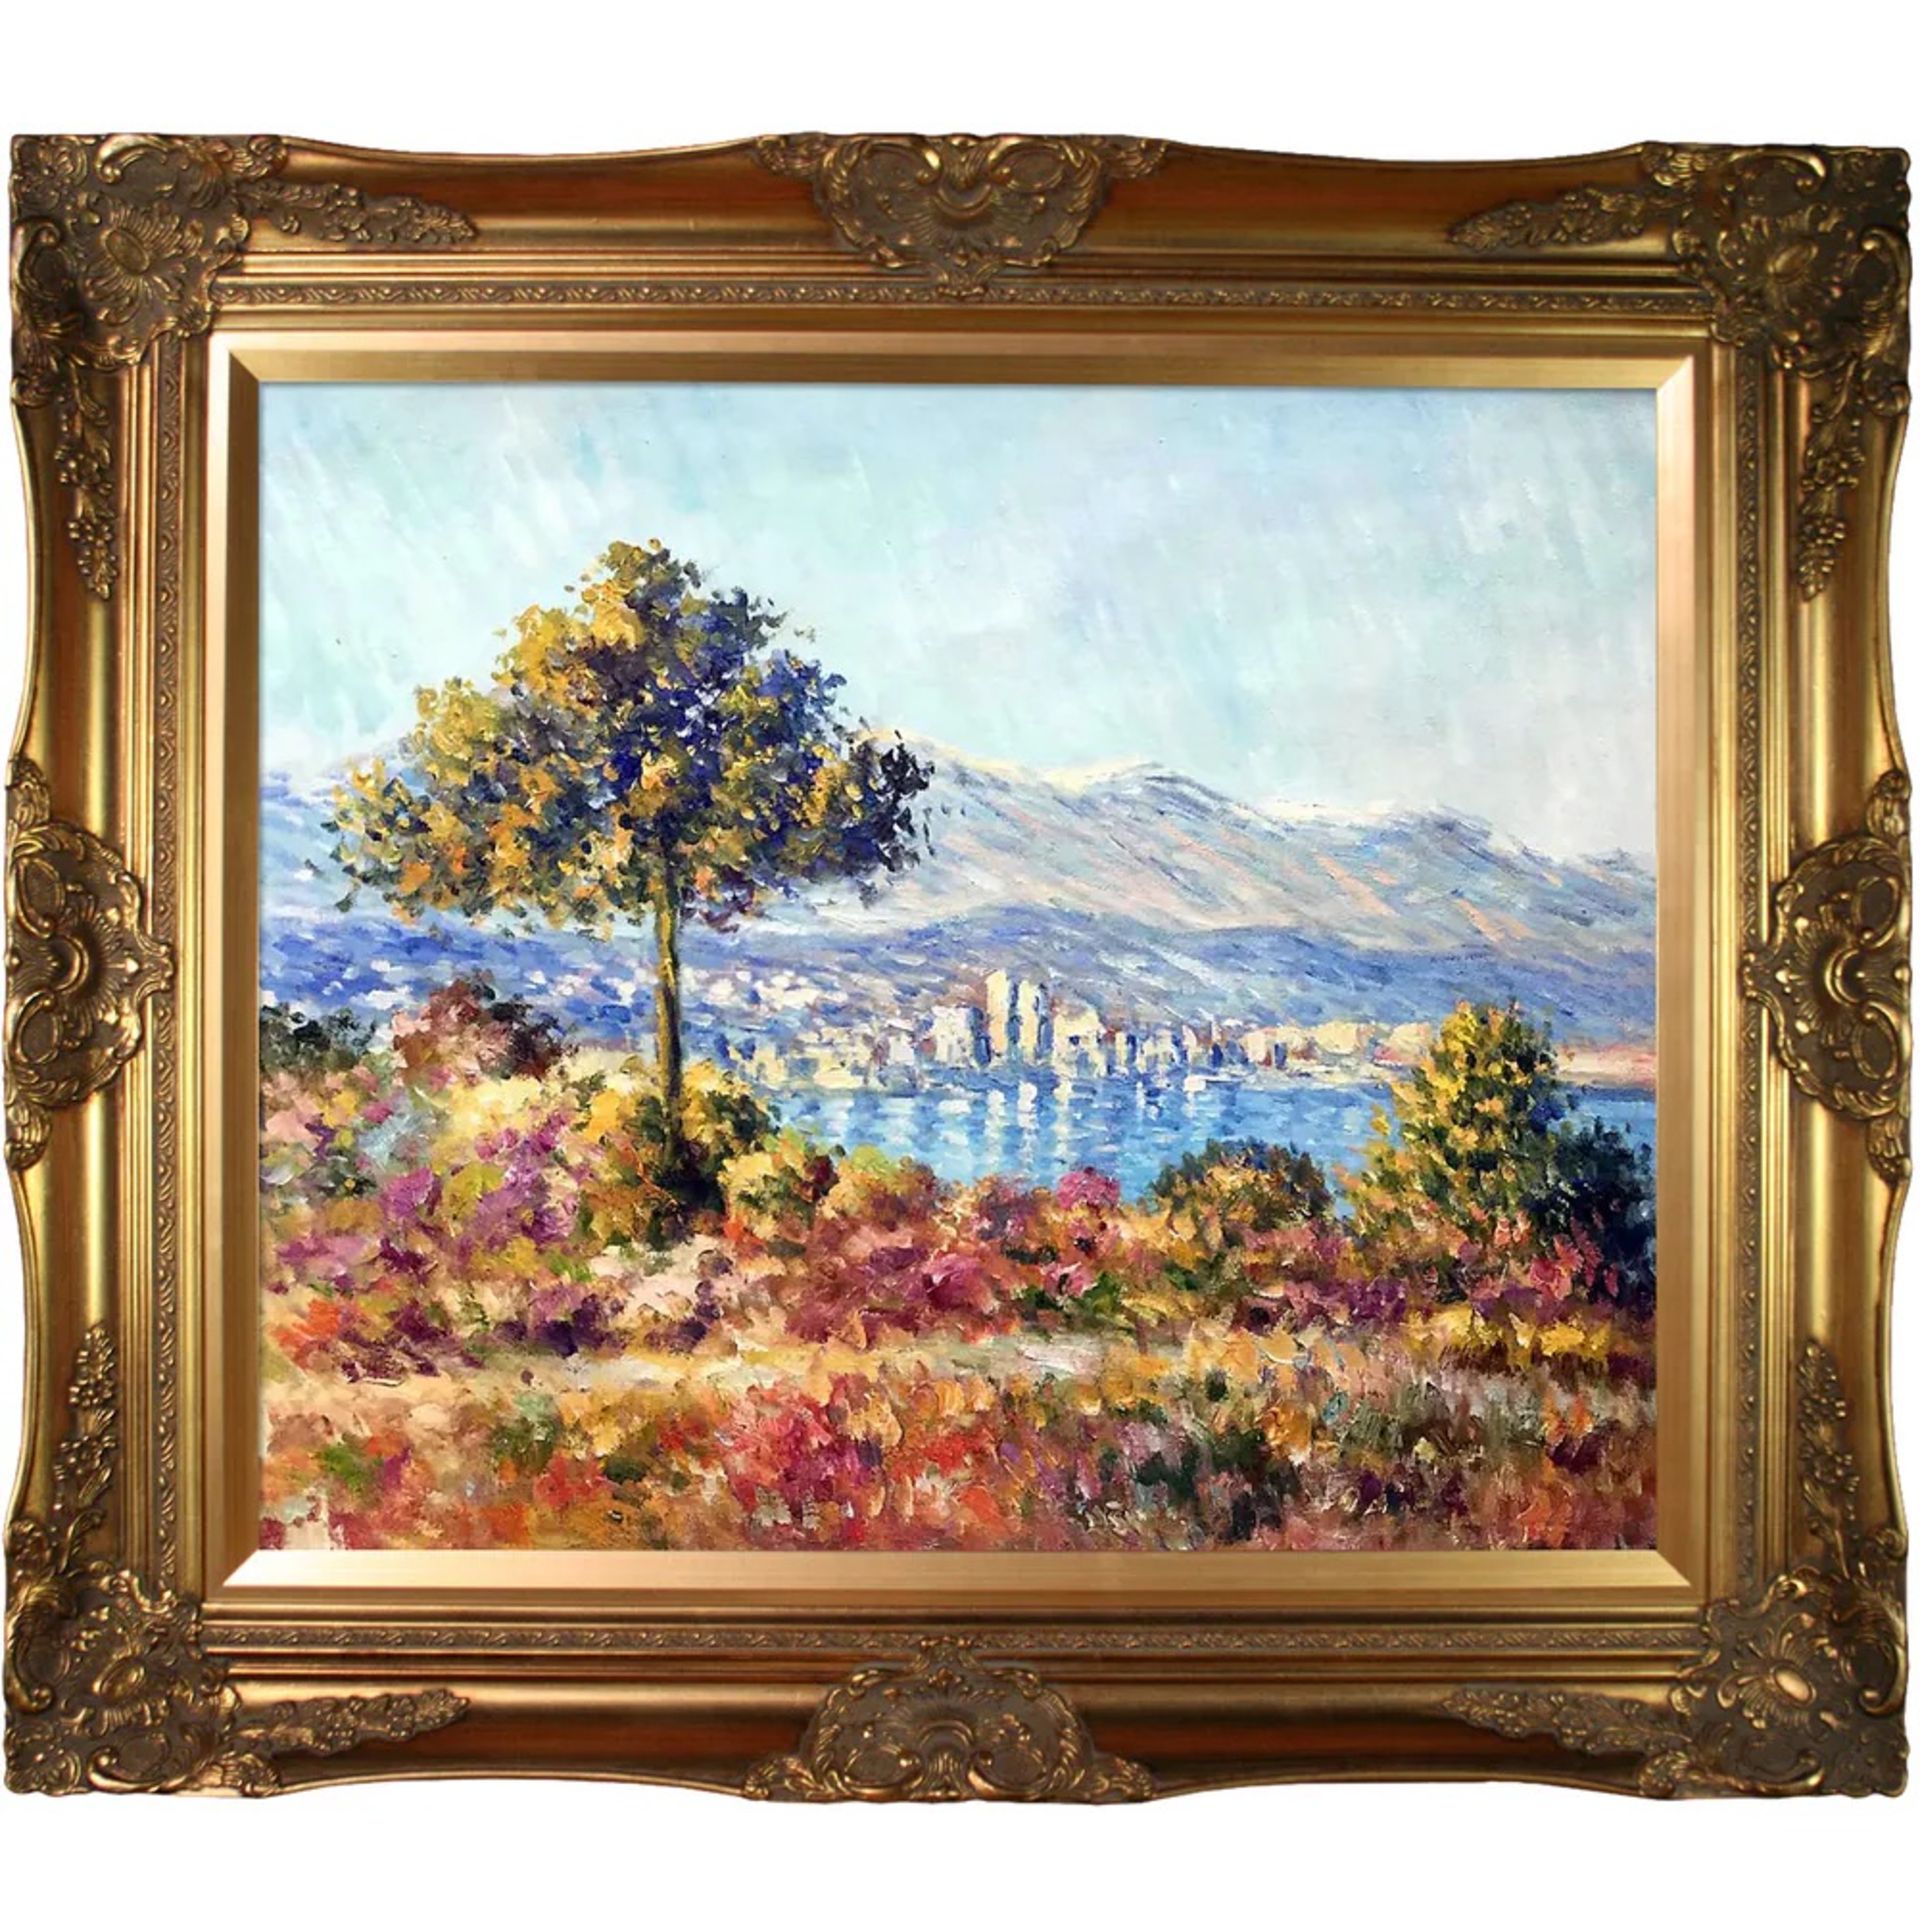 Claude Monet "Antibes, 1888" Oil Painting, After